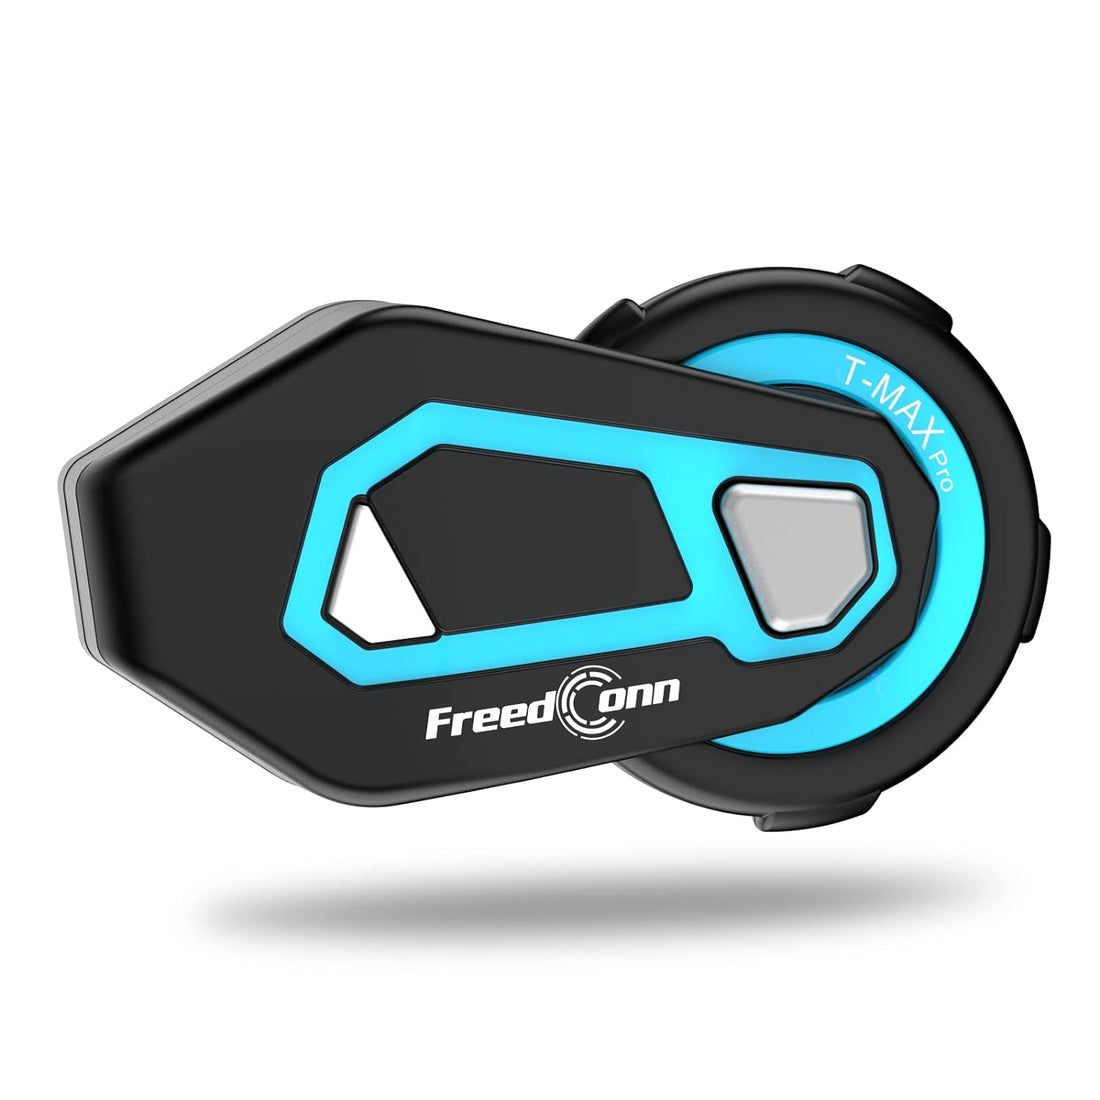 FreedConn Motorcycle Bluetooth Headset T-Max Pro Motorcycle Communication Systems 6 Riders 1000M Group Helmet Intercom with Music Sharing FM Radio CVC Noise Cancellation Motorcycle Accessories